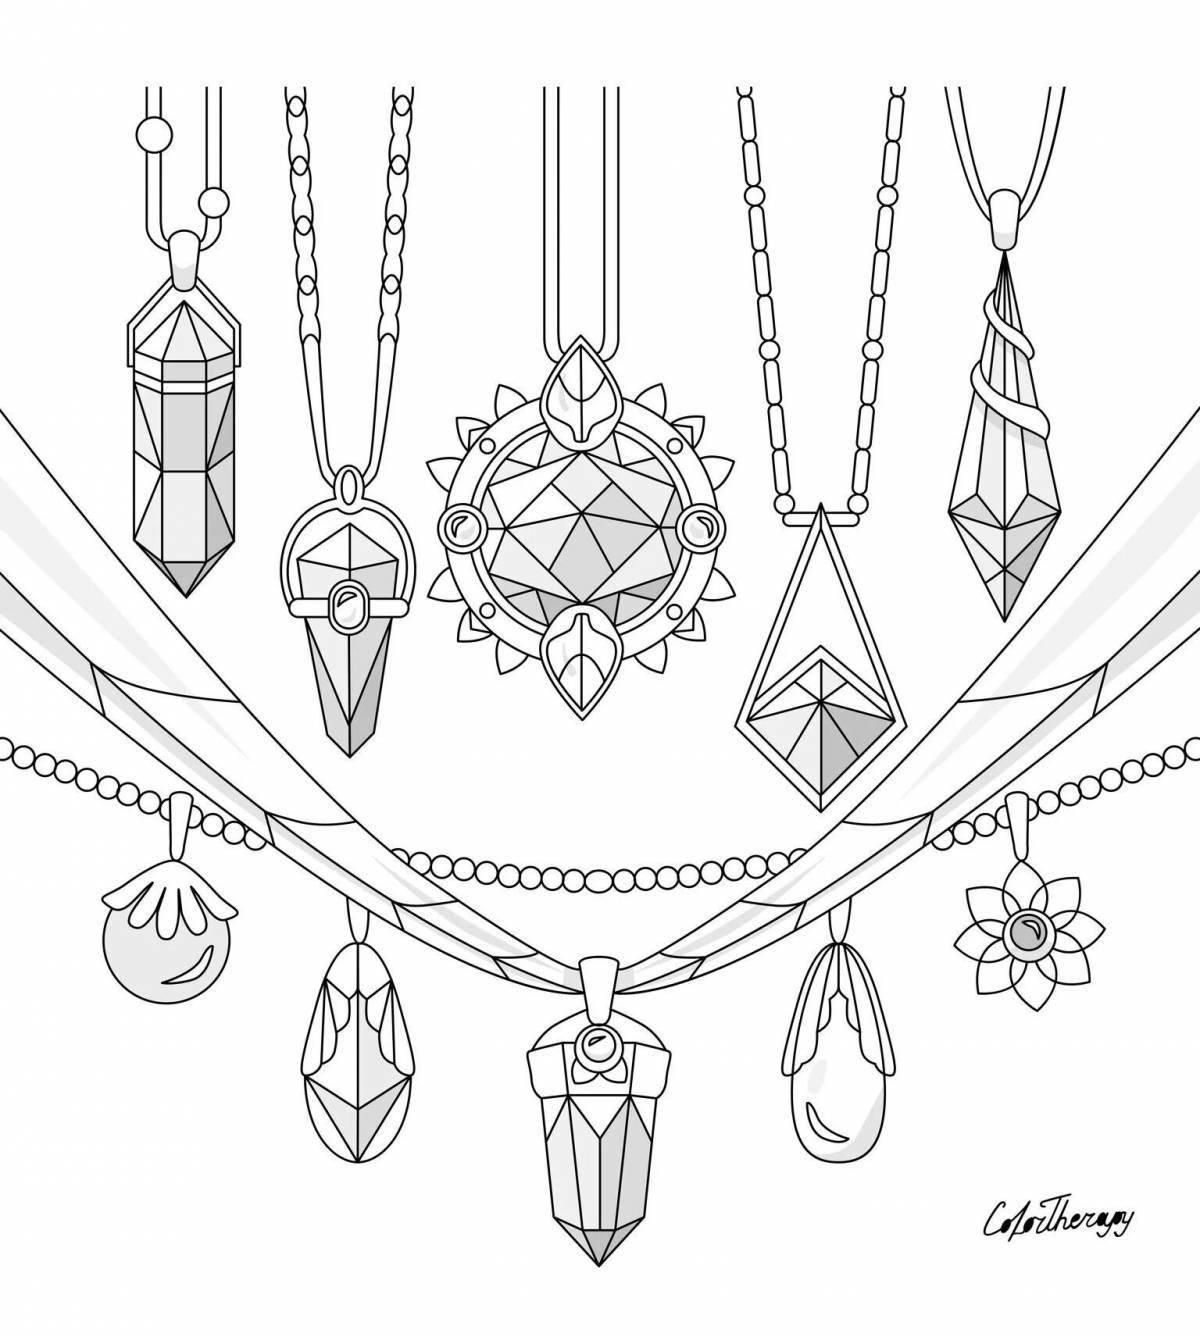 Coloring book glamor jewelry